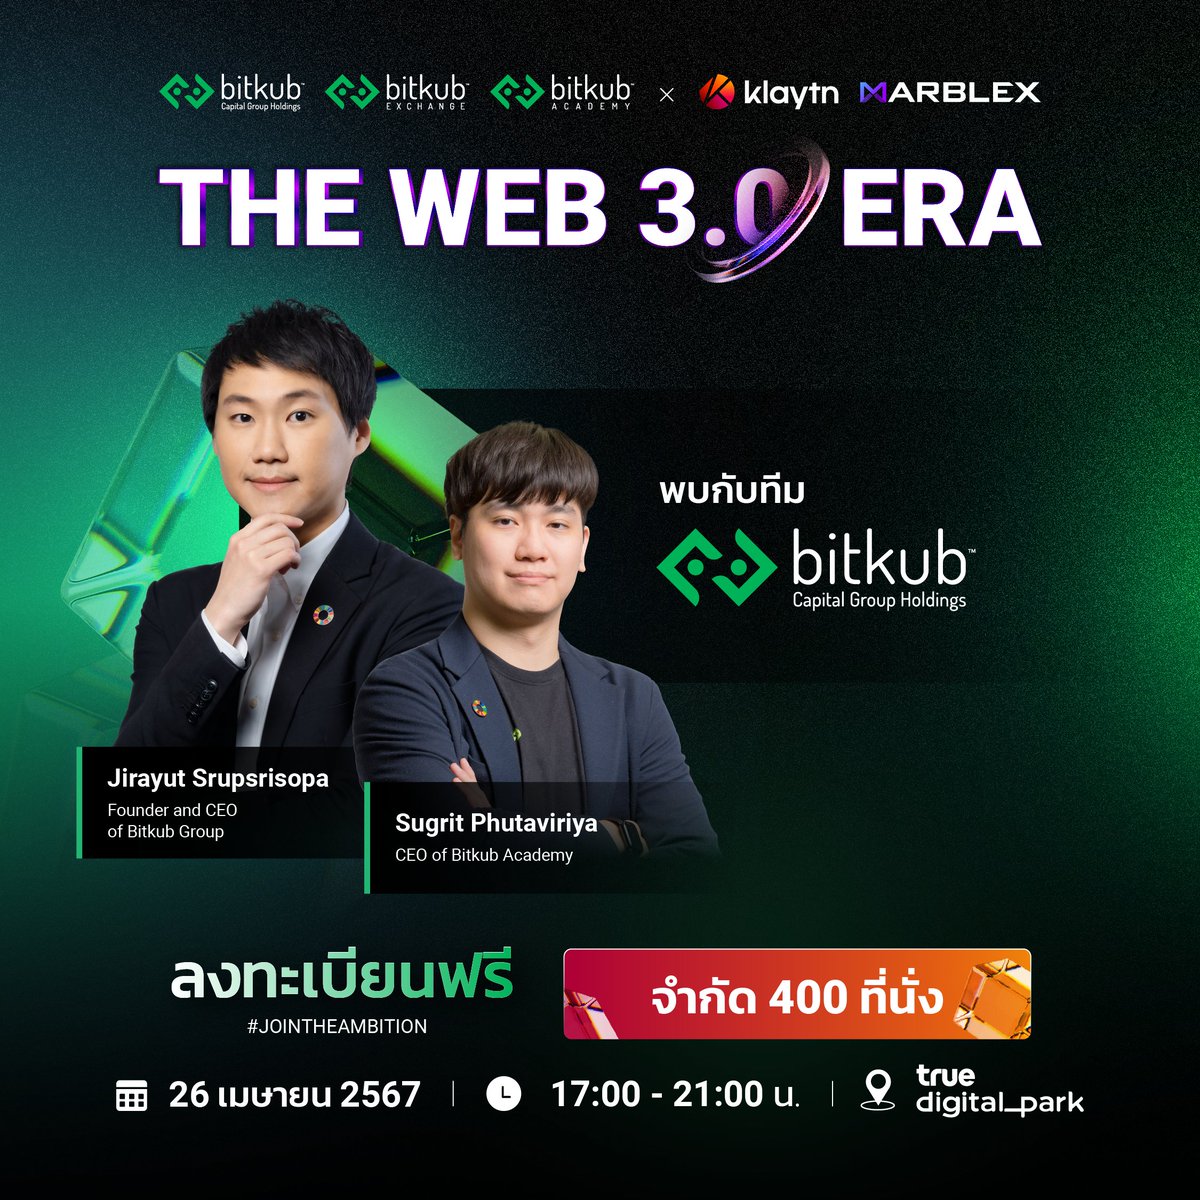 Meet and greet our expert speakers from Bitkub ⭐️Mr. Jirayut Srupsrisopa, Founder and Group CEO of Bitkub Capital Group Holdings ⭐️Mr. Sugrit Phutaviriya, CEO of Bitkub Academy . 📣#JOINTHEAMBITION @BitkubOfficial and @BitkubAcademy have joined forces with @klaytn_official and…